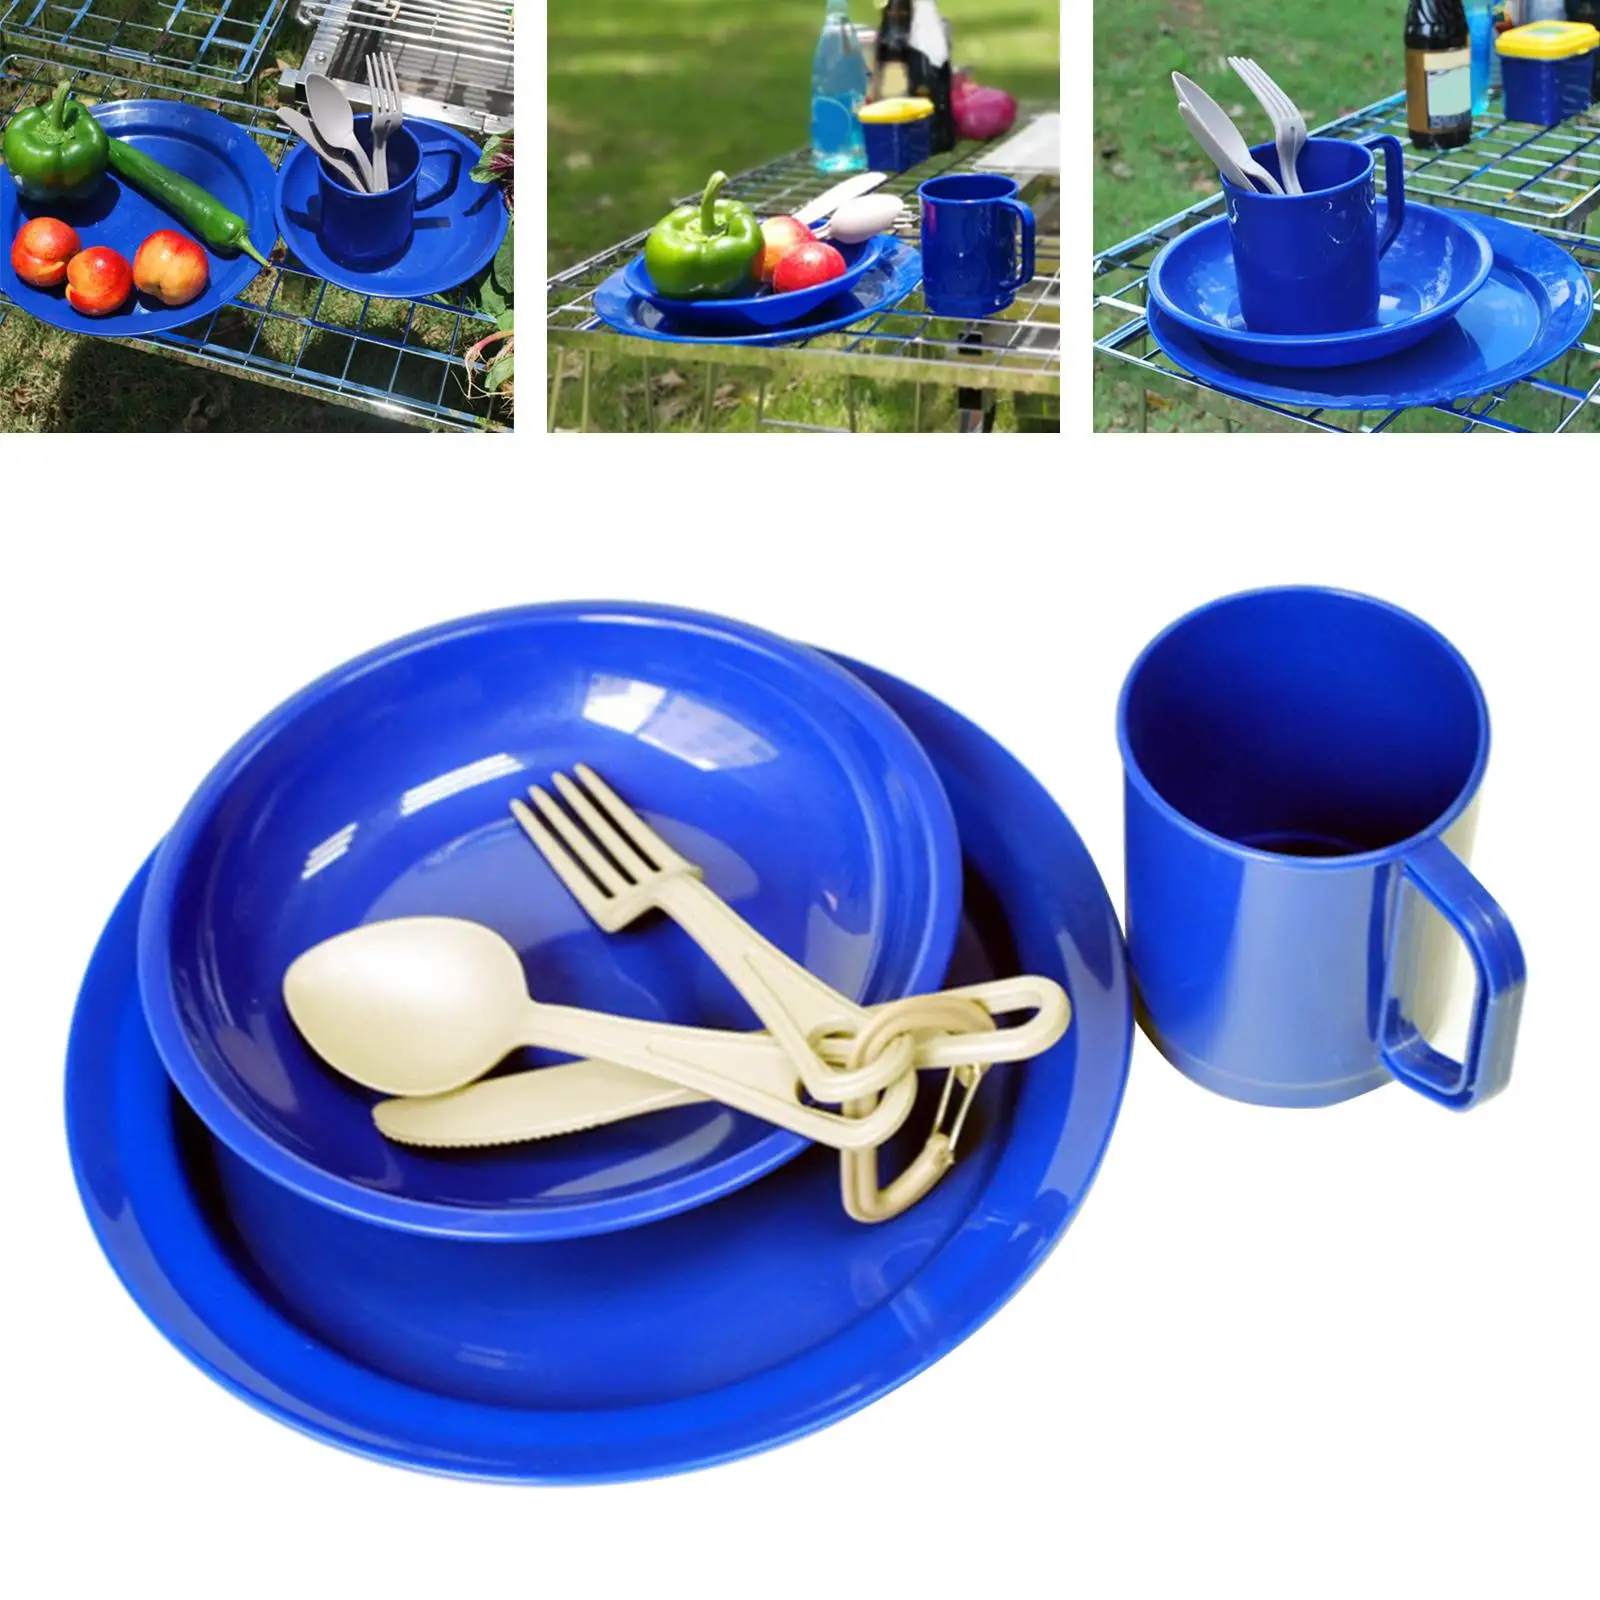 6x Outdoor Camping Tableware Set with Mesh Carry Bag Plate Bowl Cup Mug 1-Person for Backpacking Picnic Hiking Cooking Supplies